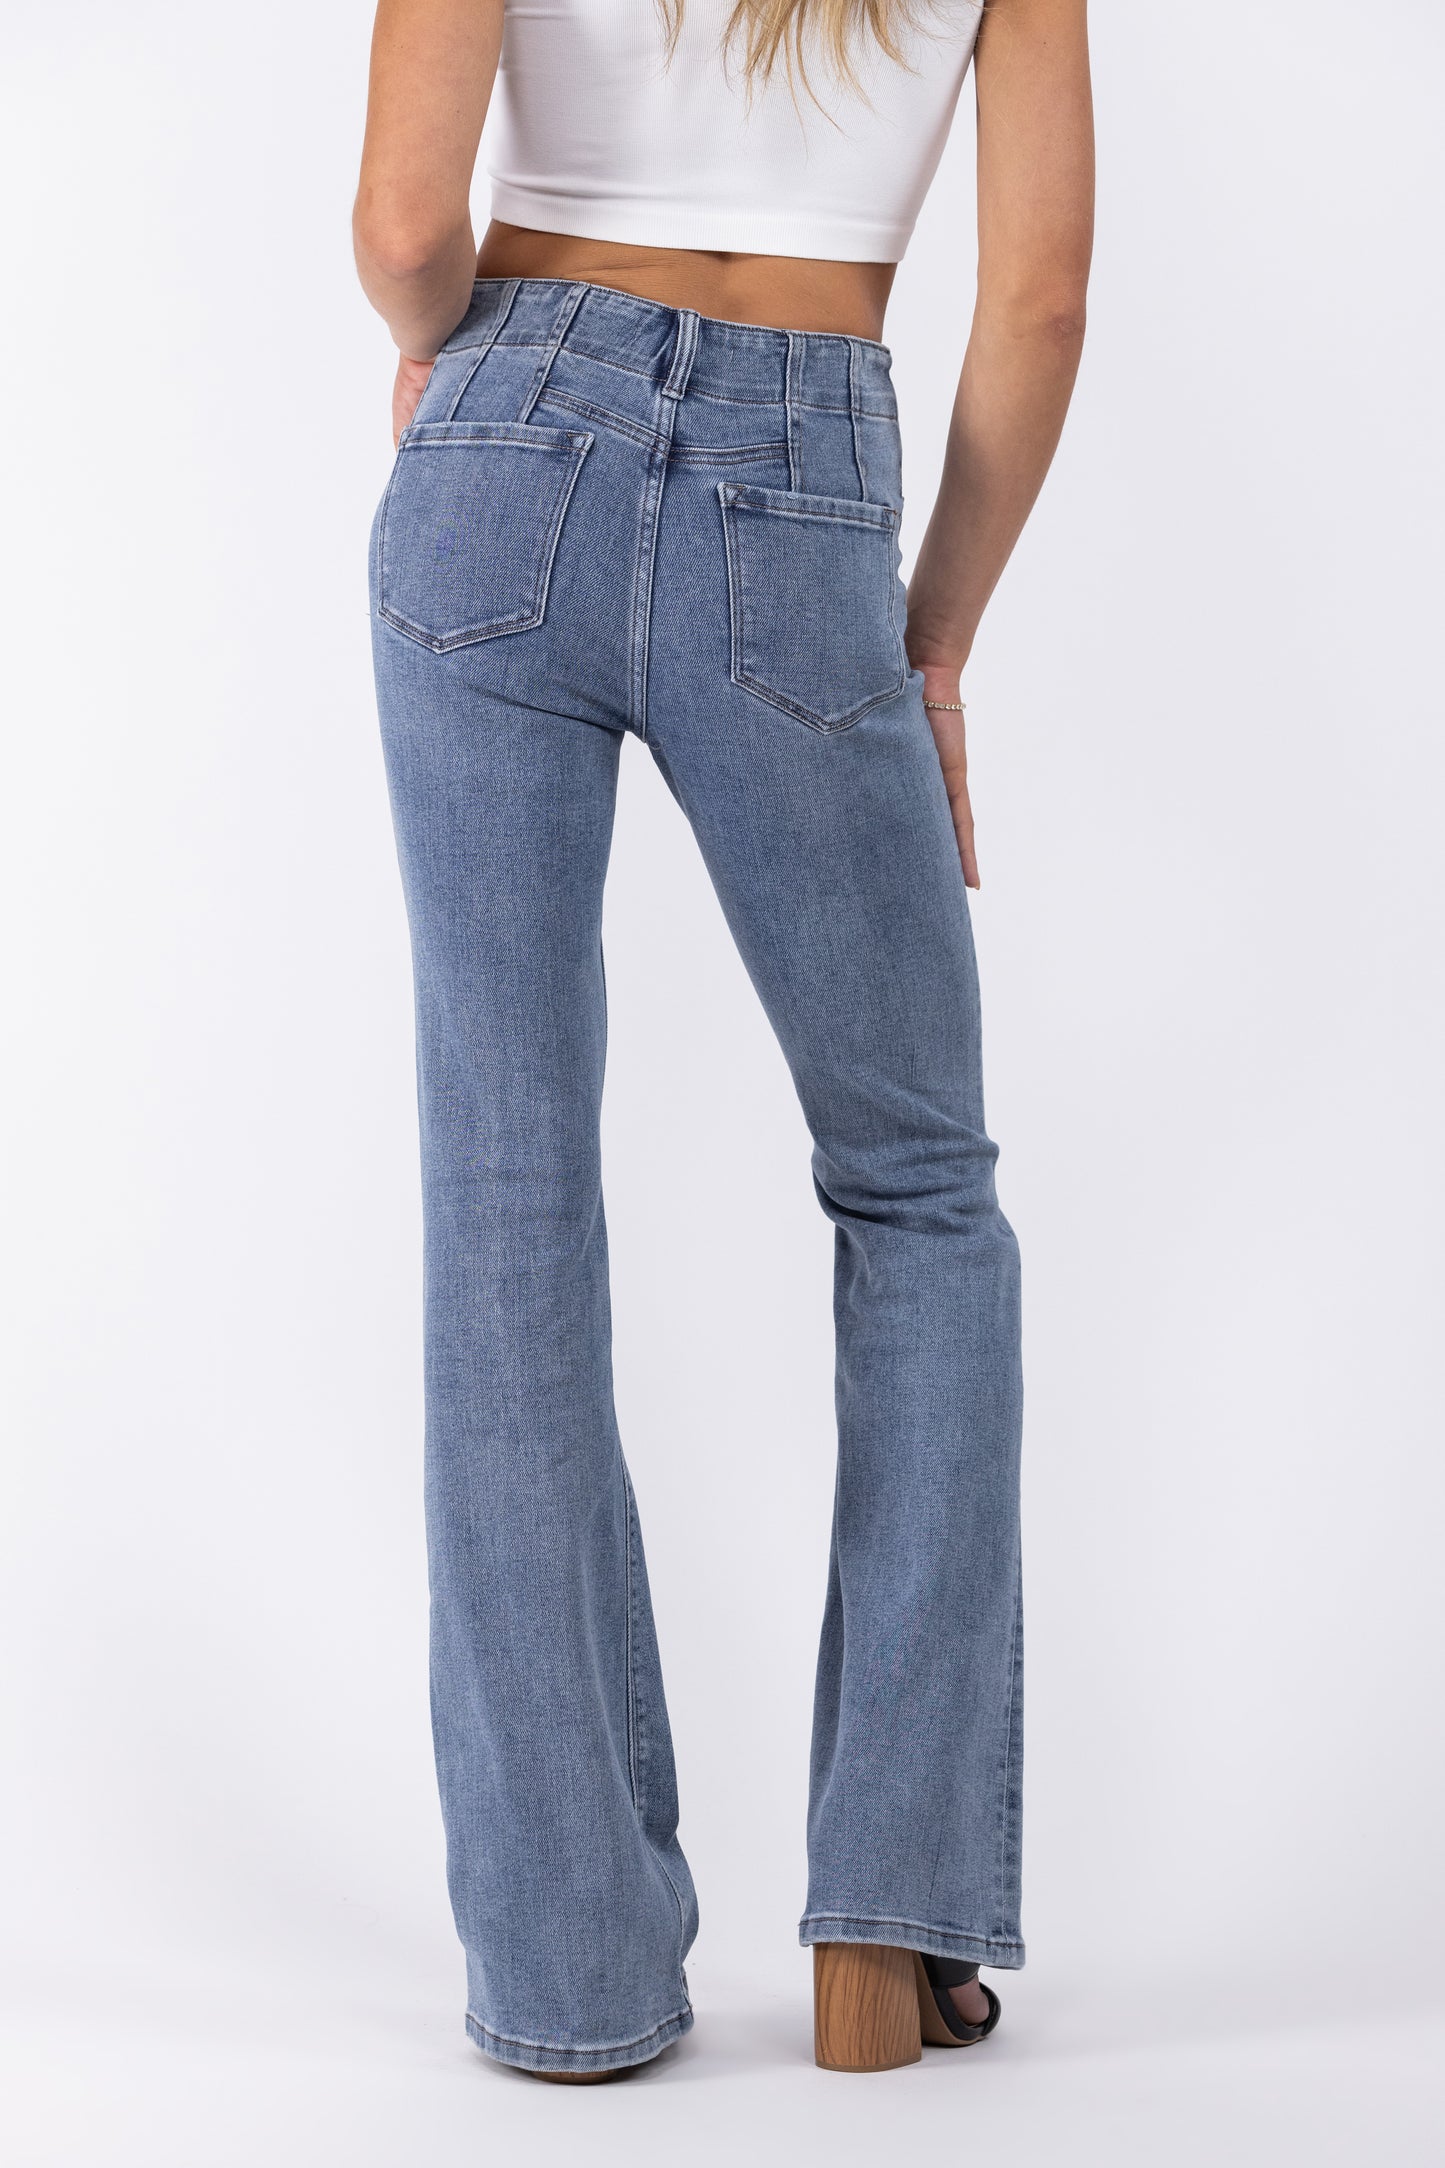 2 LENGTHS The Brooklyn from Lovervet: ALB Exclusive High-Rise Flare Denim featuring Patch Pockets Dart Detail